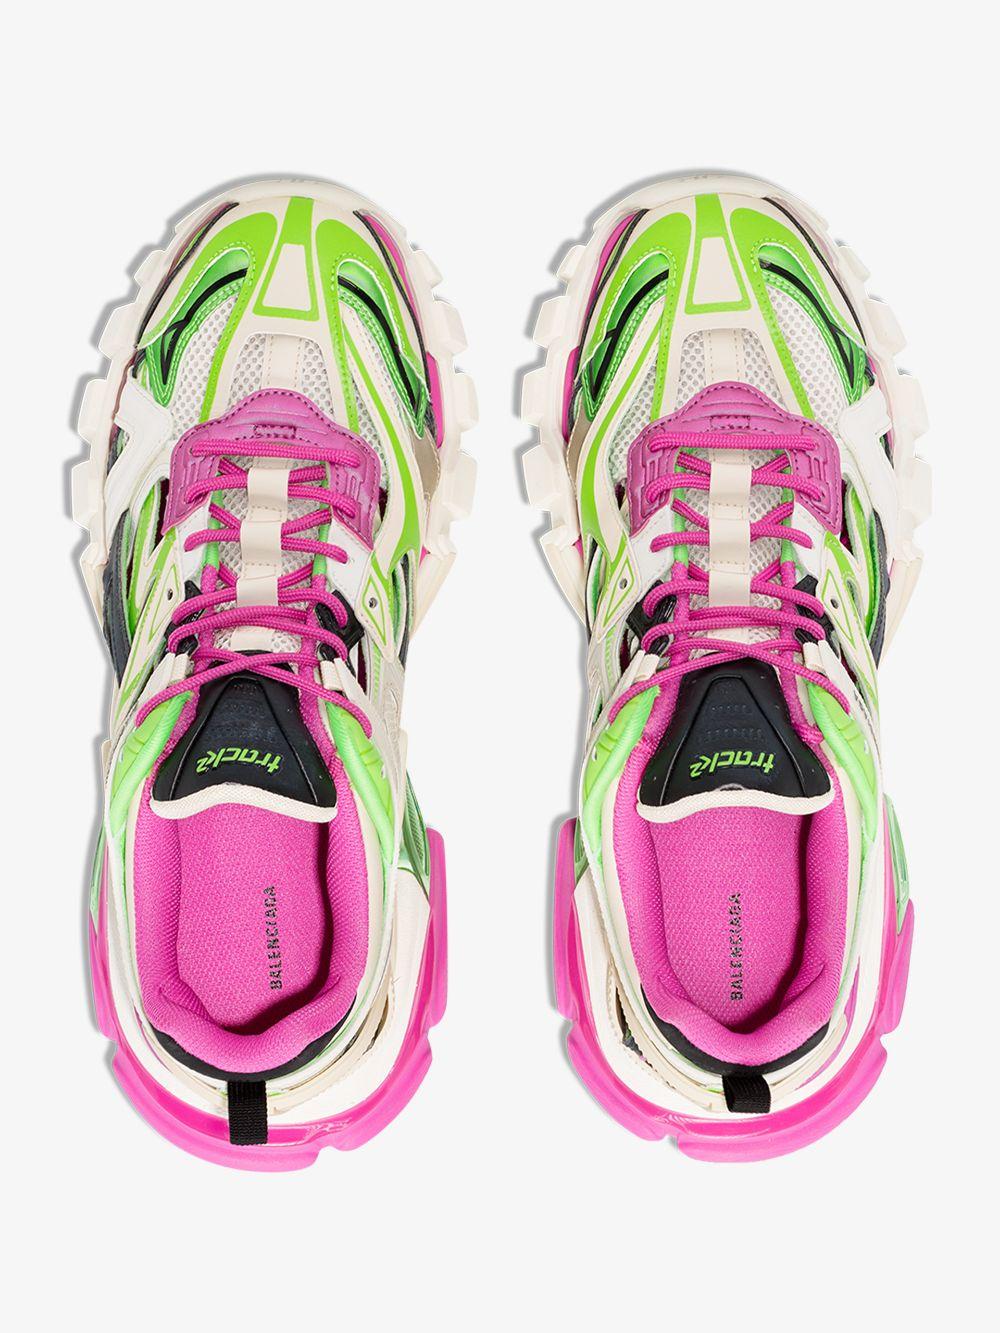 Balenciaga White, Green And Pink Track 2 Sneakers for Men - Lyst